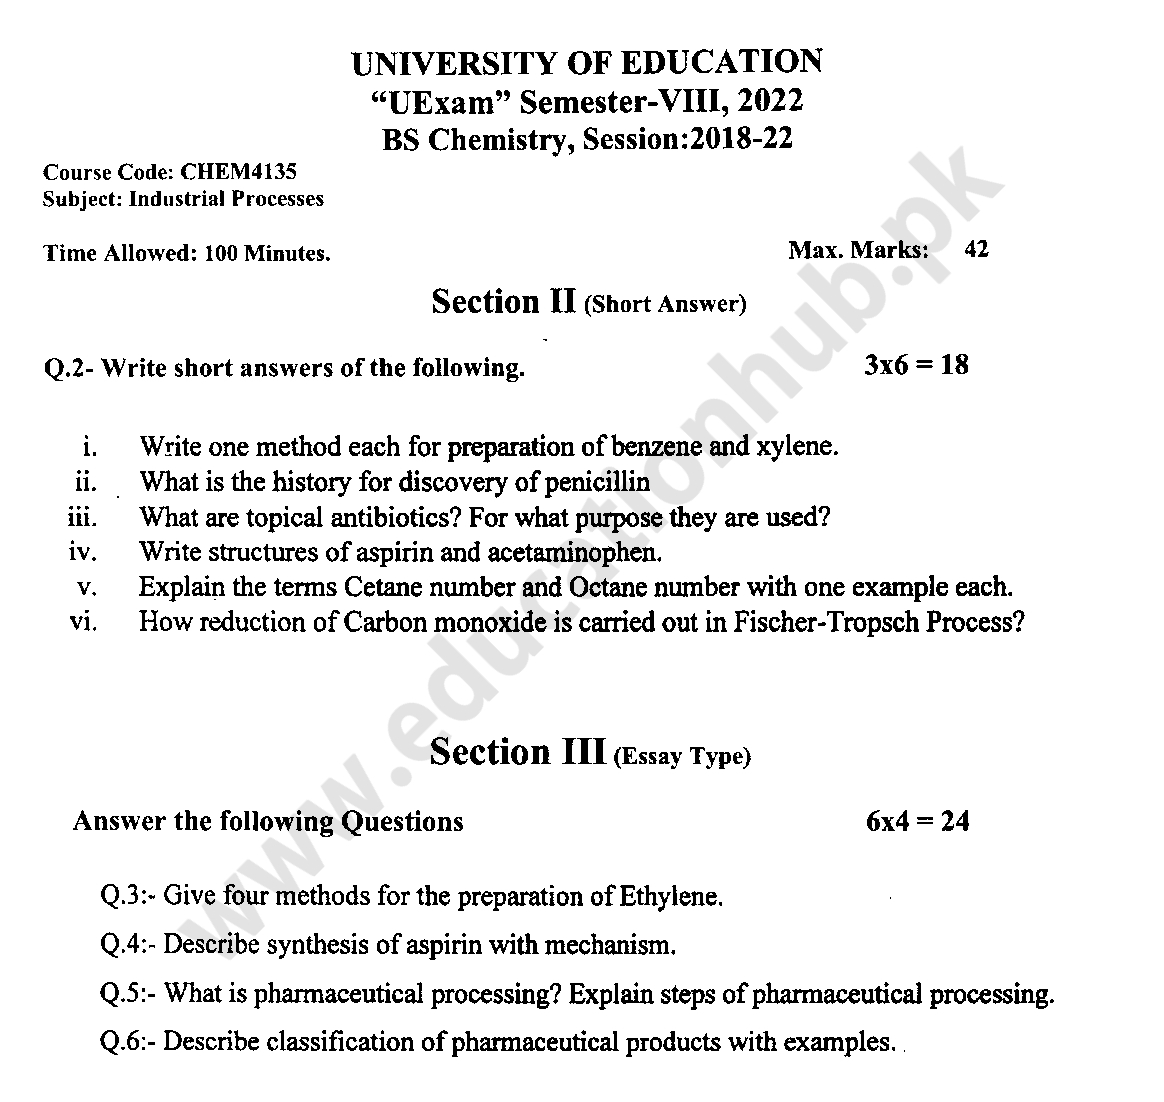 CHEM-4135 subjective BS Chemistry Education University Past Papers